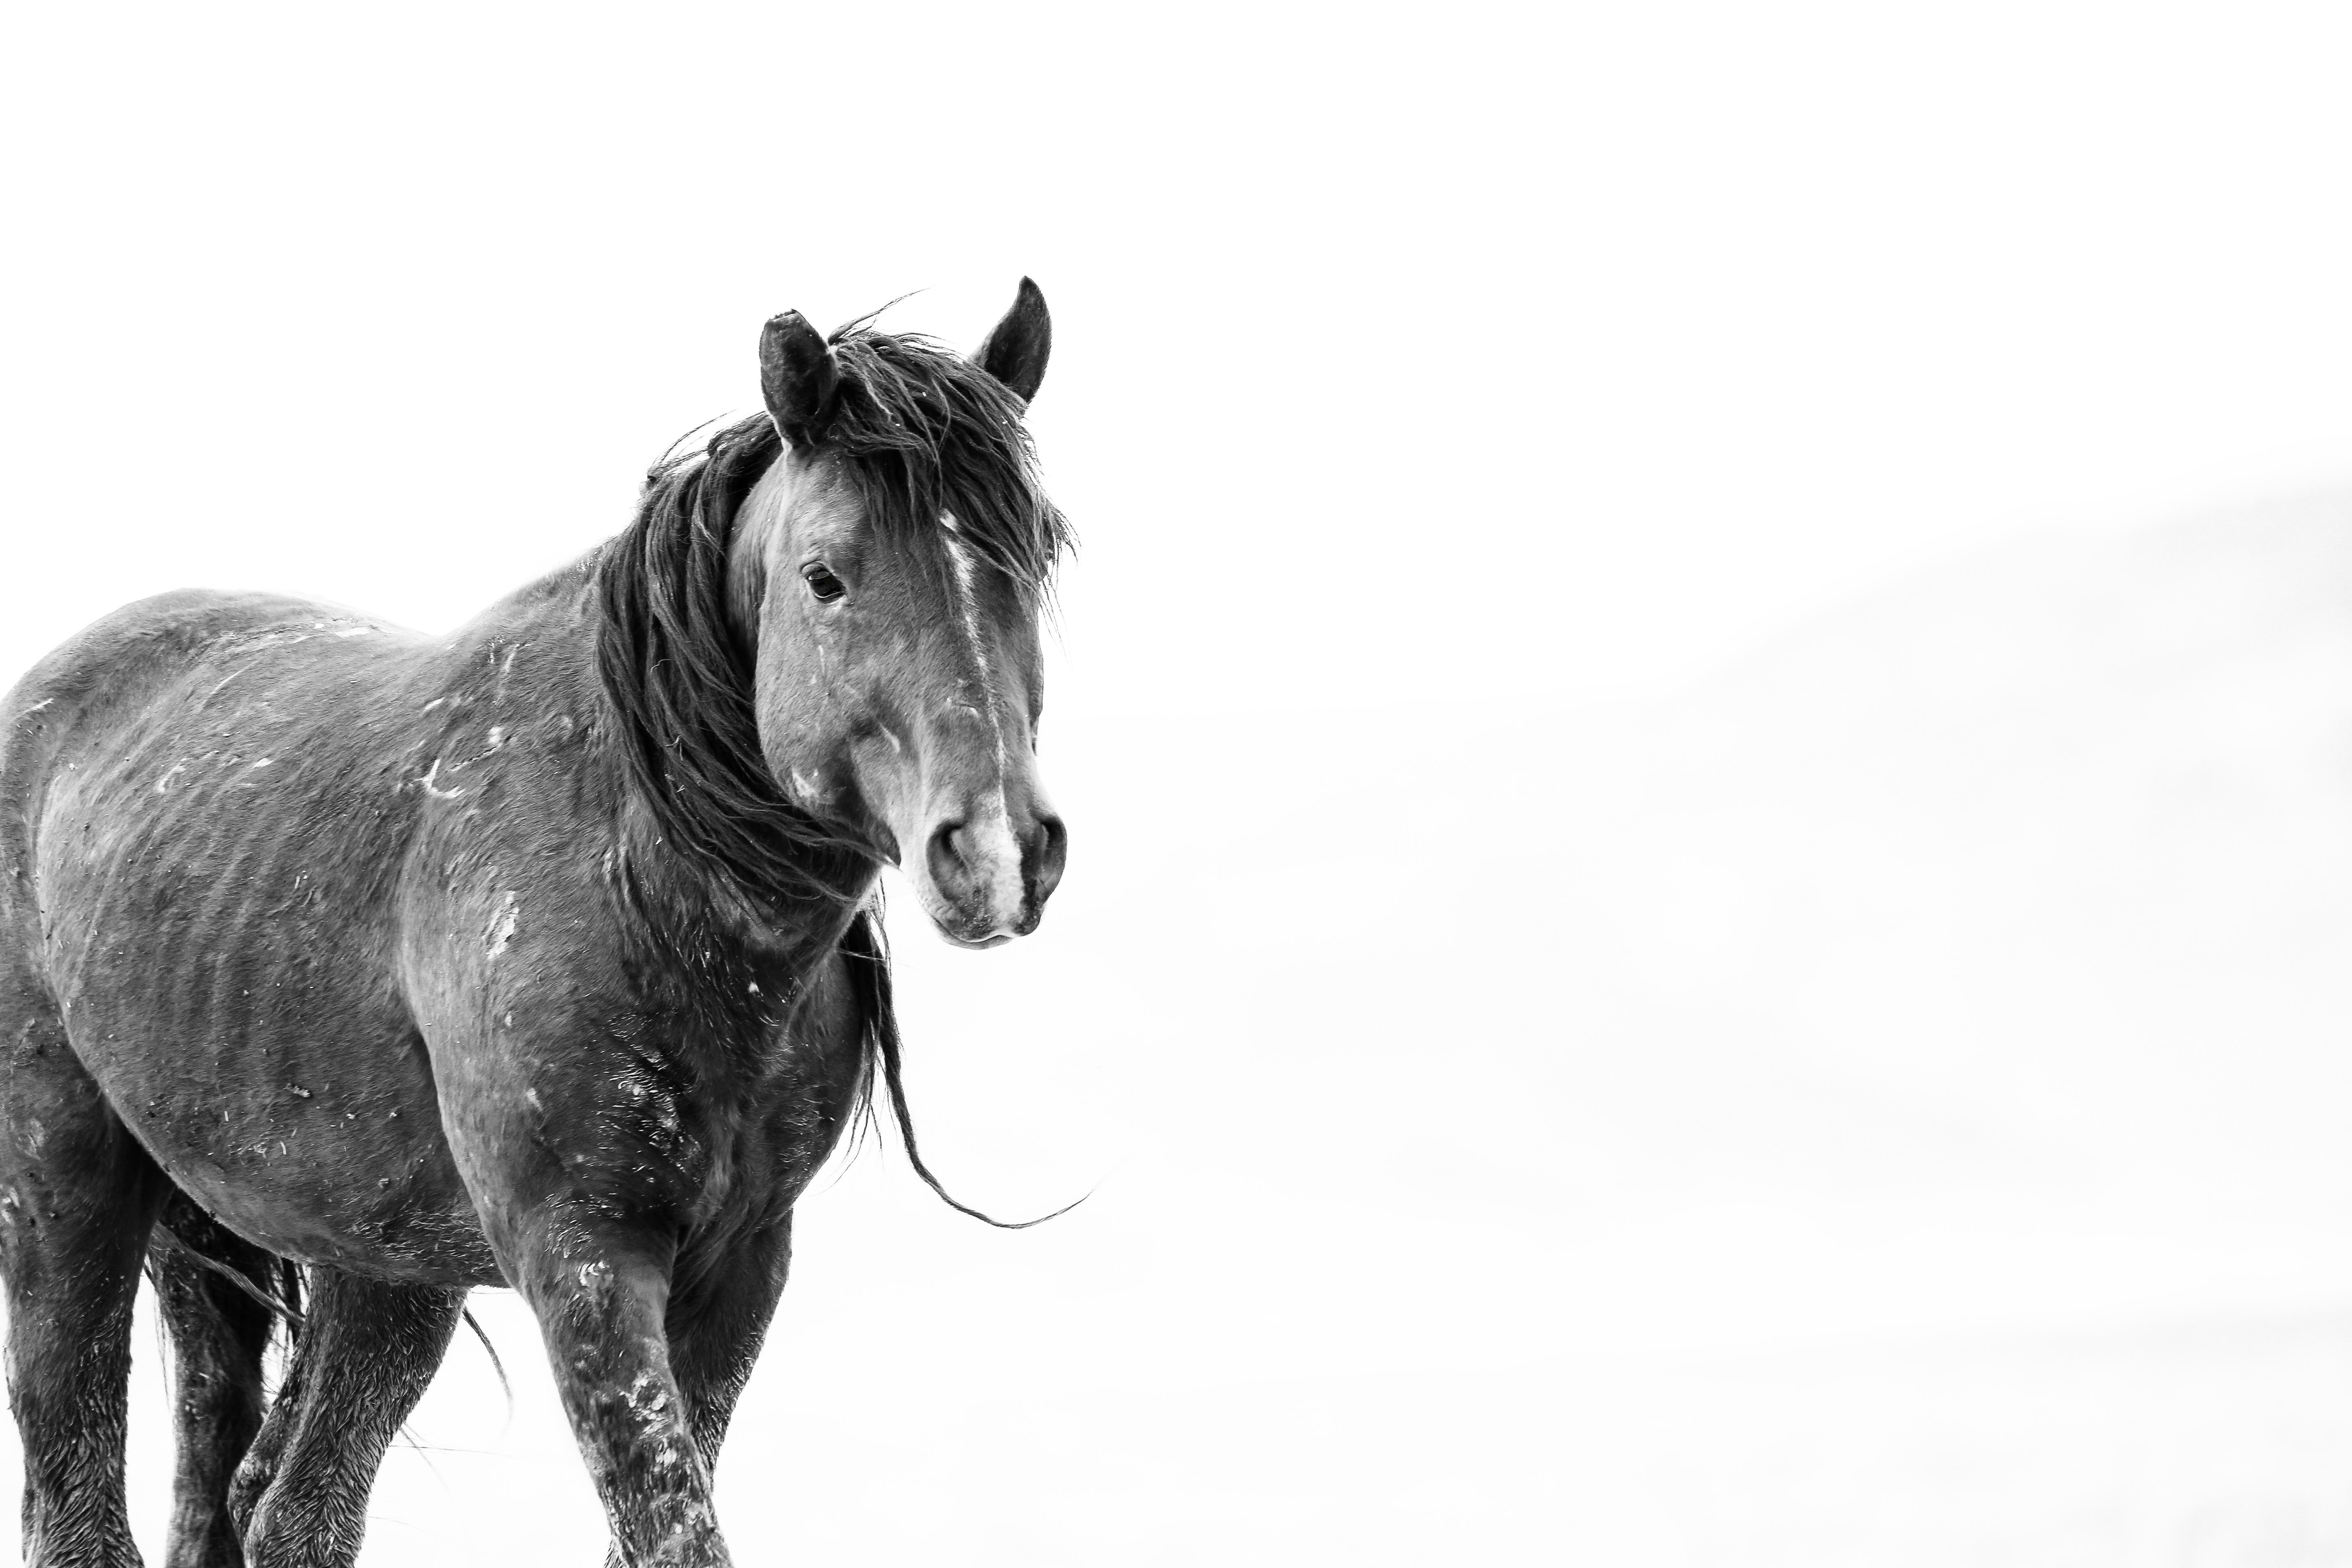 Shane Russeck Animal Print - SOLO 40x60  Black & White Photography, Wild Horses Mustang Fine Art Unsigned